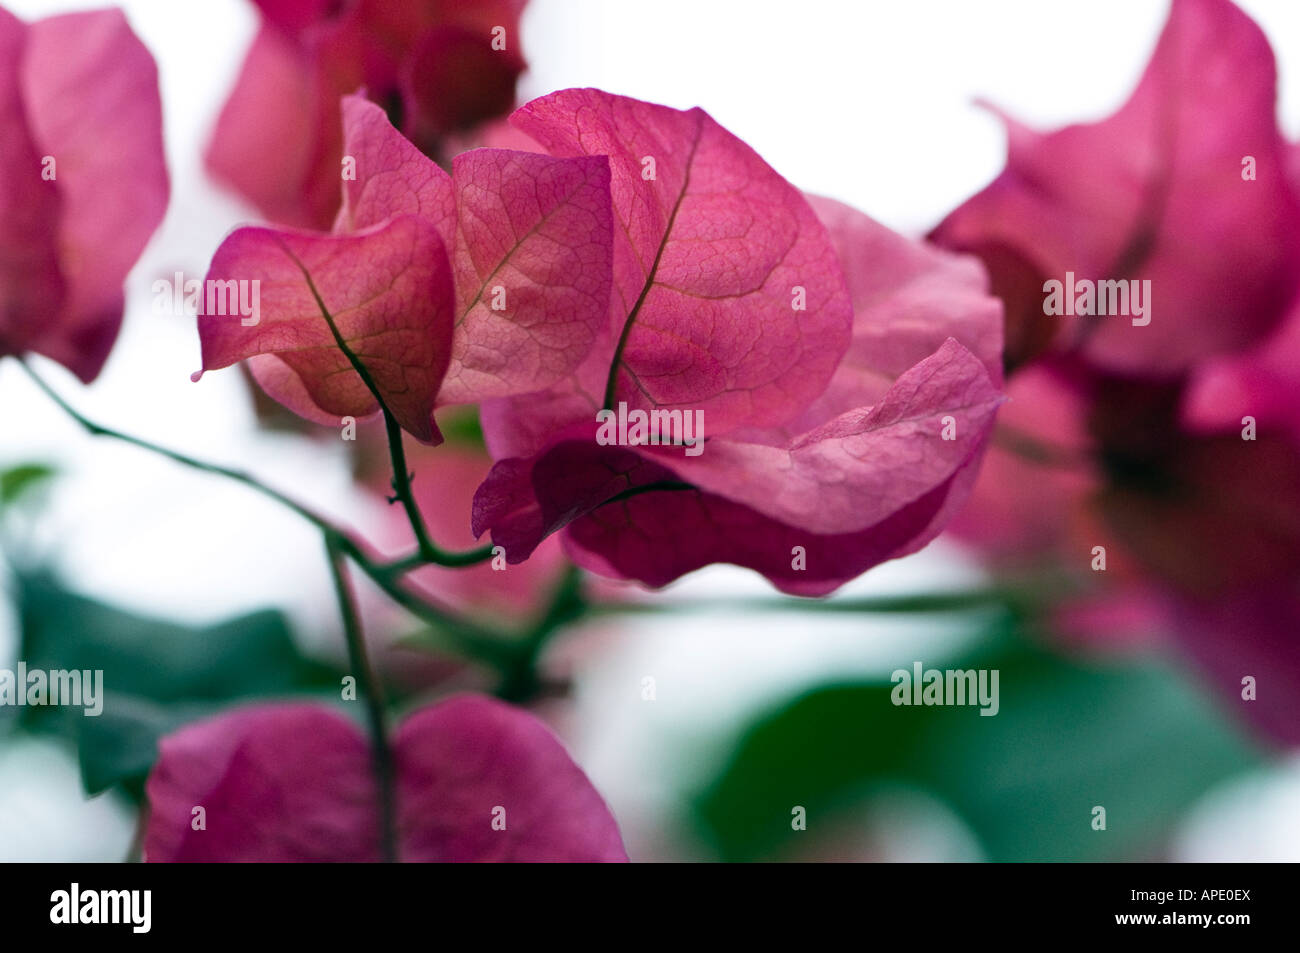 Bougainvillea in pink, a thorny tropical climber. Stock Photo